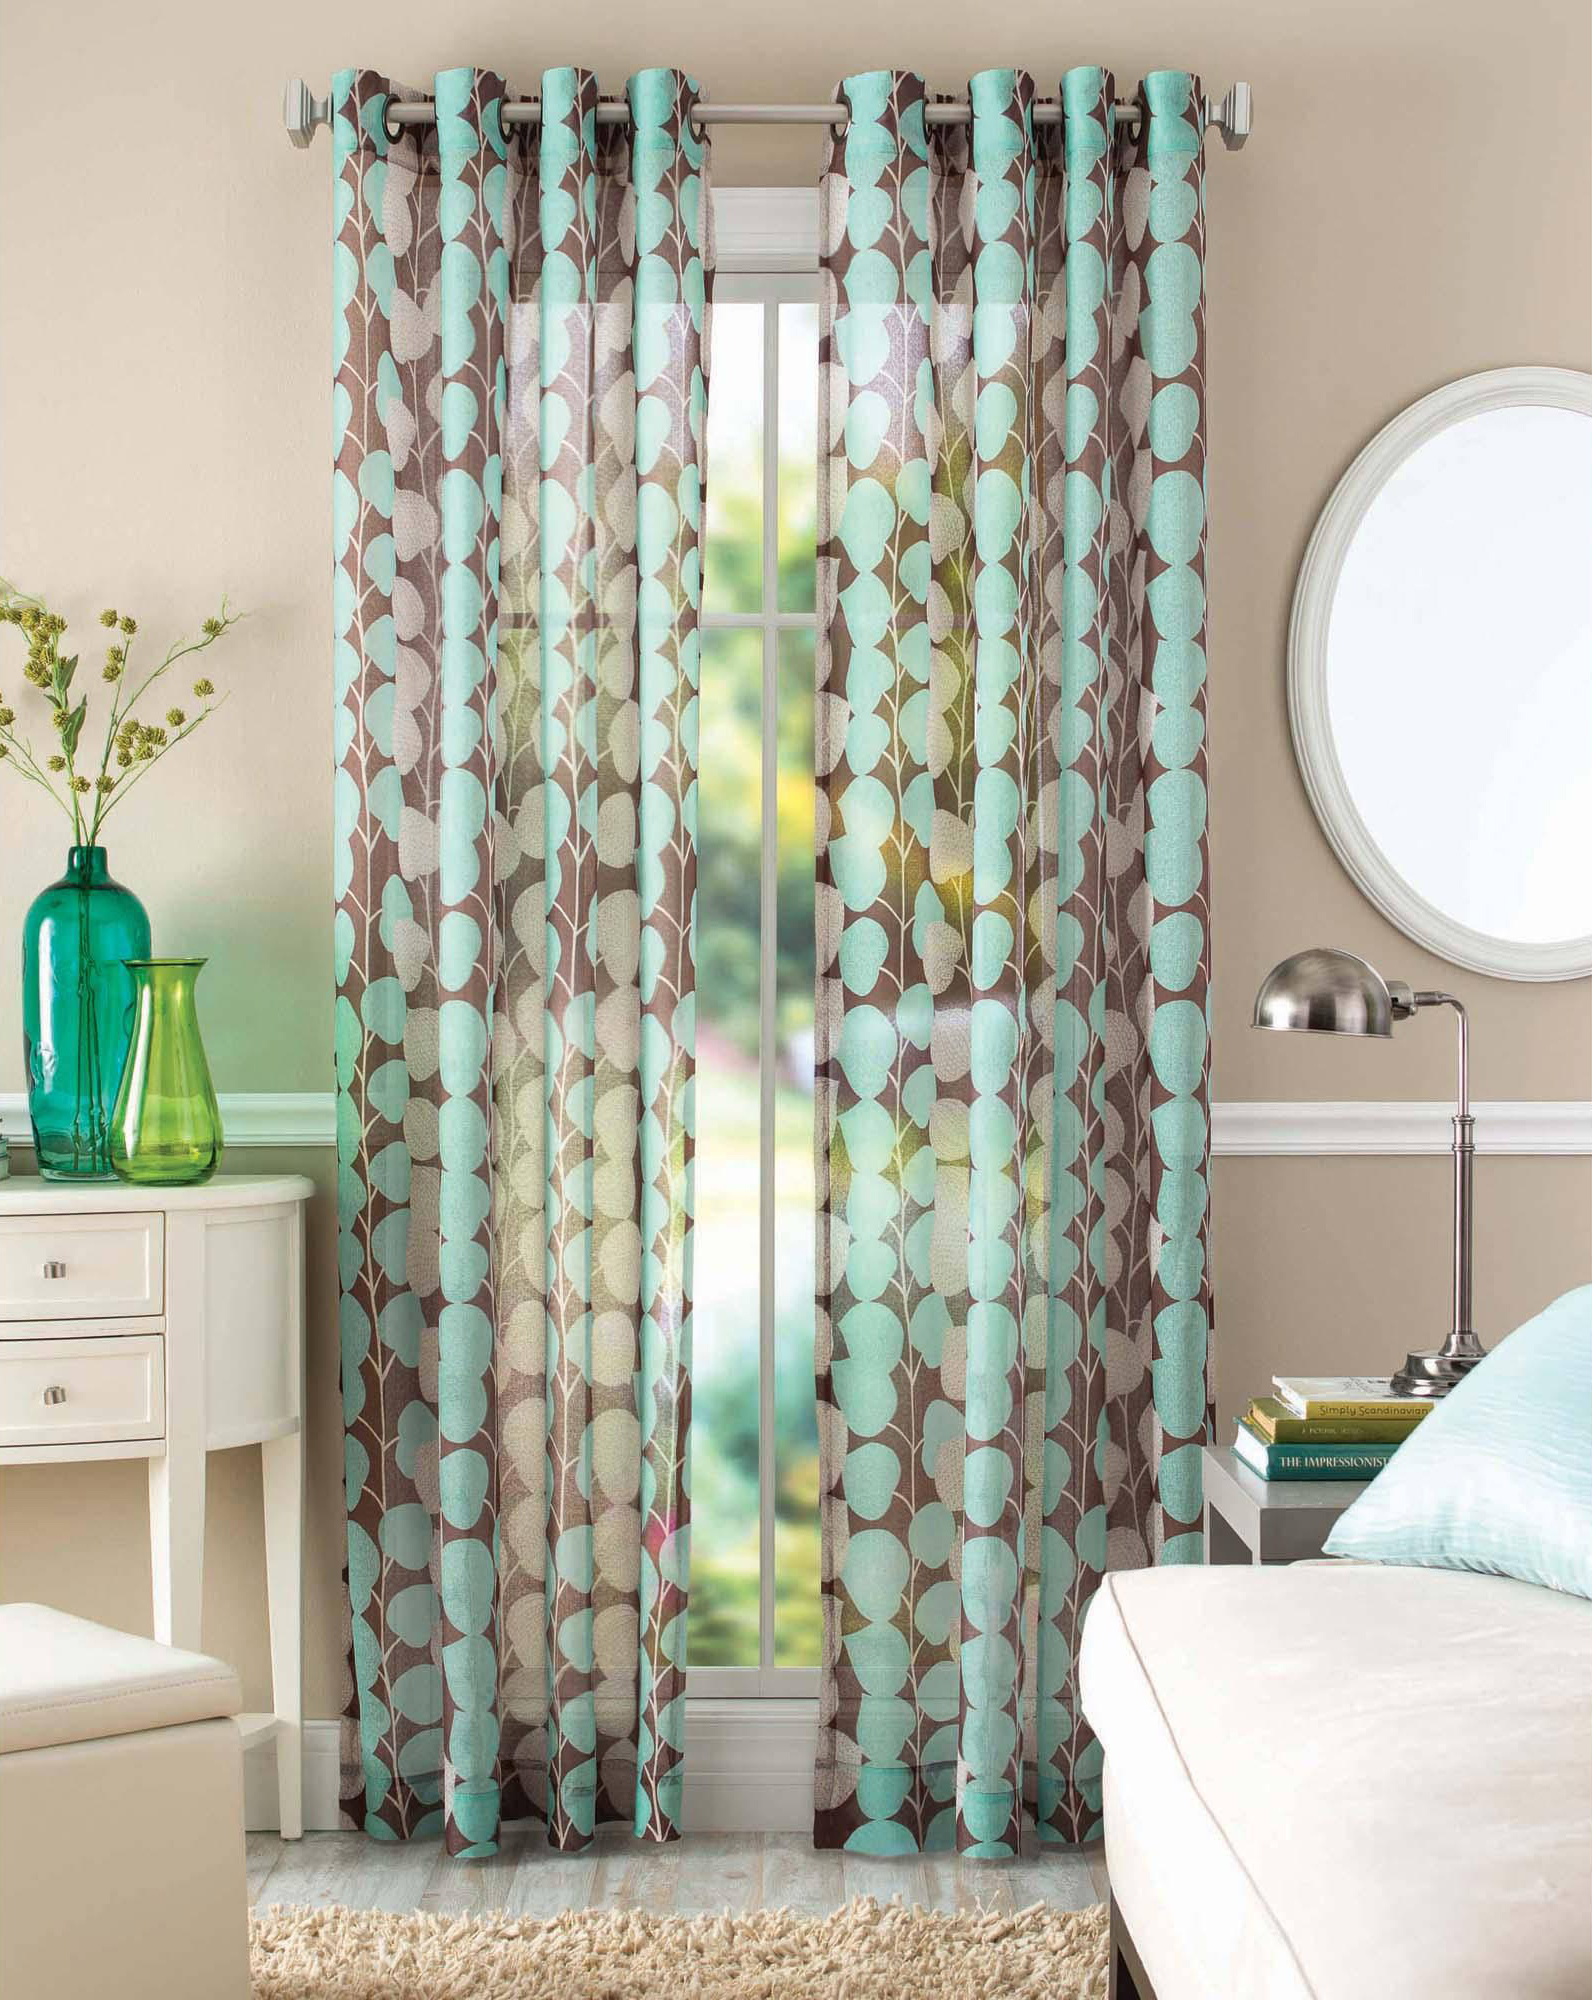 Better Homes and Garden Vine Leaf Curtain Panel